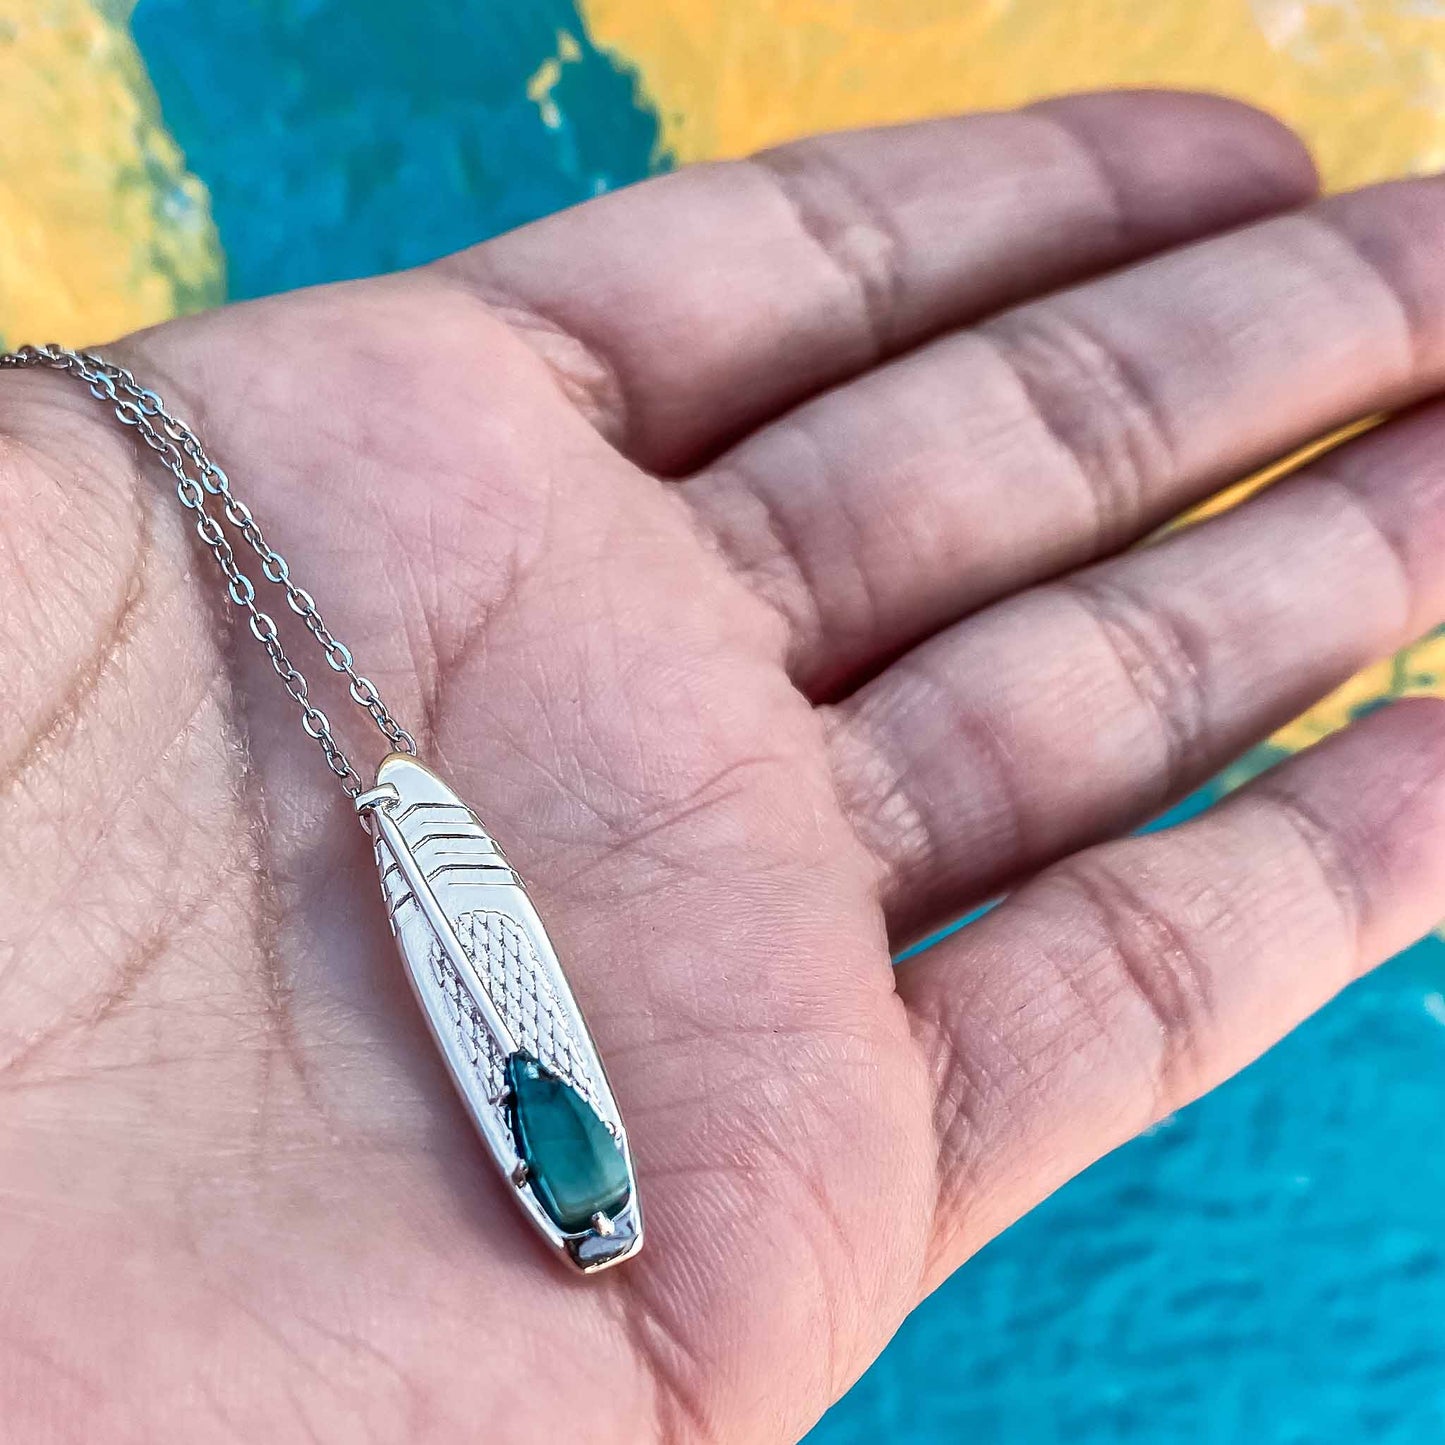 Looking for places to buy or rent a paddle board? This stand up paddle board pendant will be the best and highest performance SUP you'll ever find. Take your paddle board with you, even when you're not surfing, racing or touring. Shop May's birthstone SUP jewelry online or at a surf shop near you.